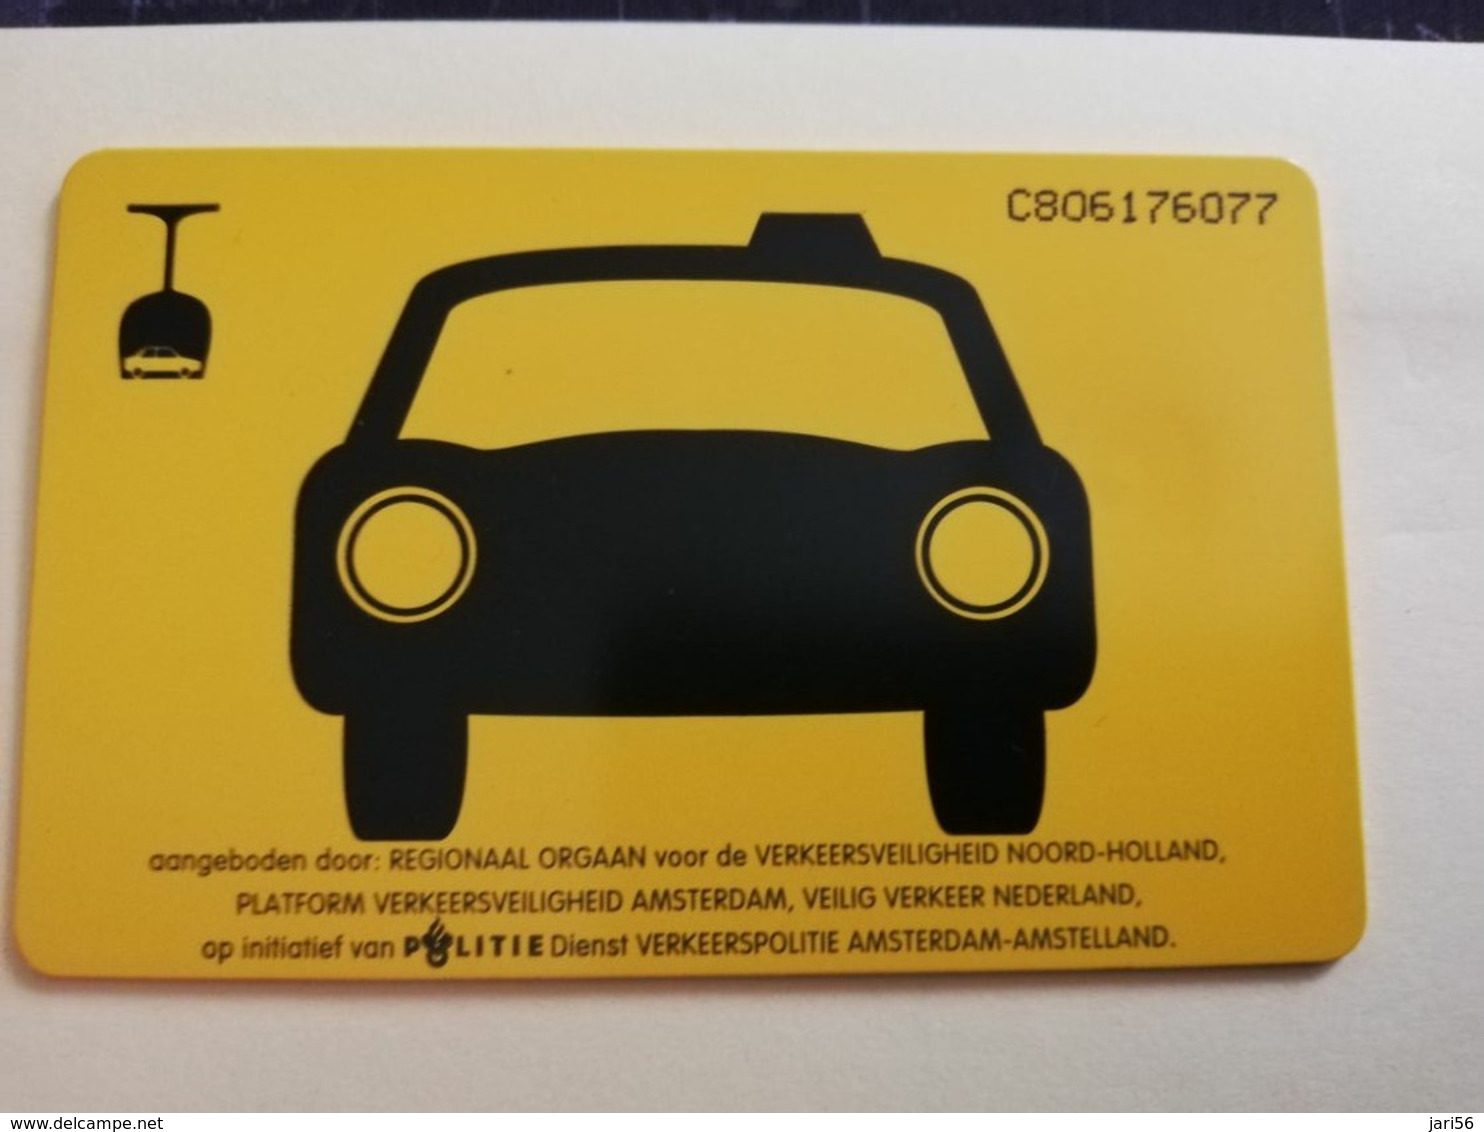 NETHERLANDS  ADVERTISING CHIPCARD HFL 2,50 CRD 232 TAXI CENTRALE AMSTERDAM      Fine Used   ** 3174 ** - Private